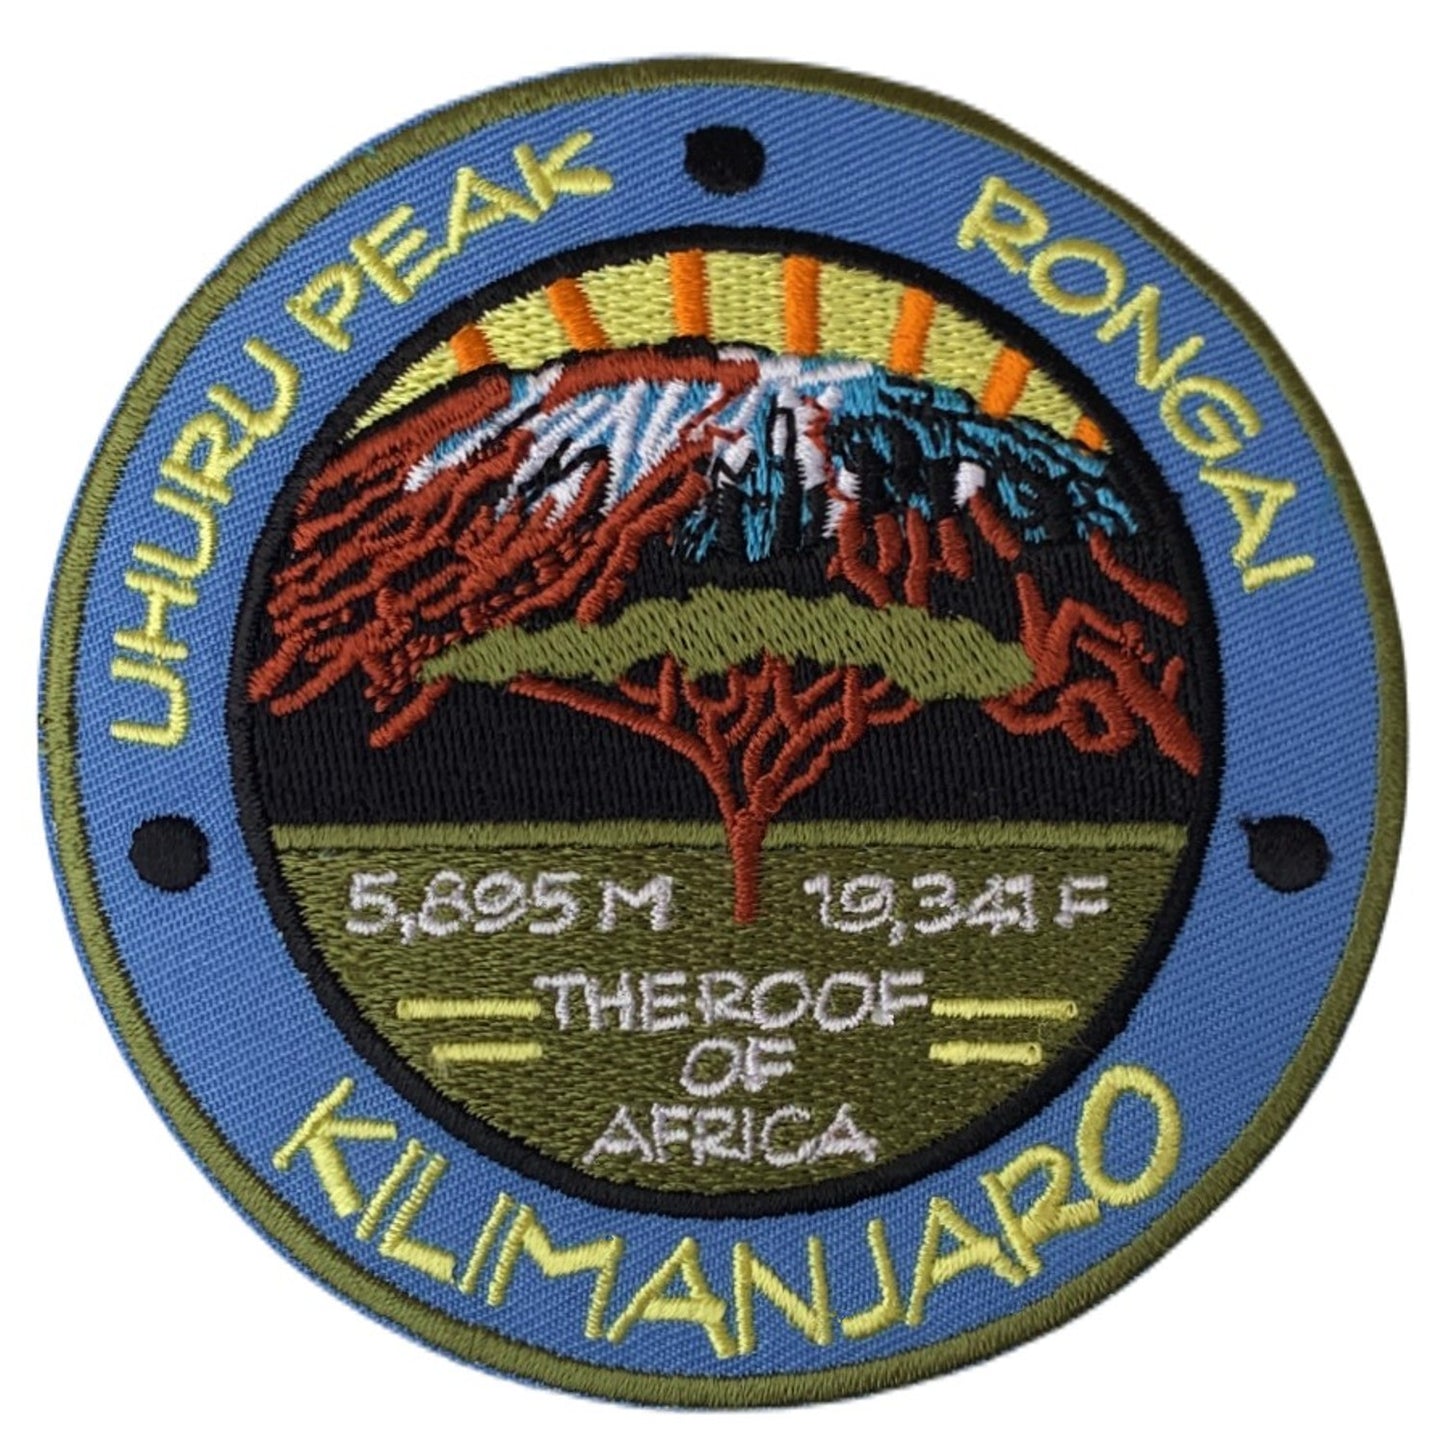 Mount Kilimanjaro Uhuru Peak Tanzania Rongai Route Patch (3.5 Inch) Iron-on or Sew-on Badge The Roof of Africa Souvenir Emblem Gift Patches